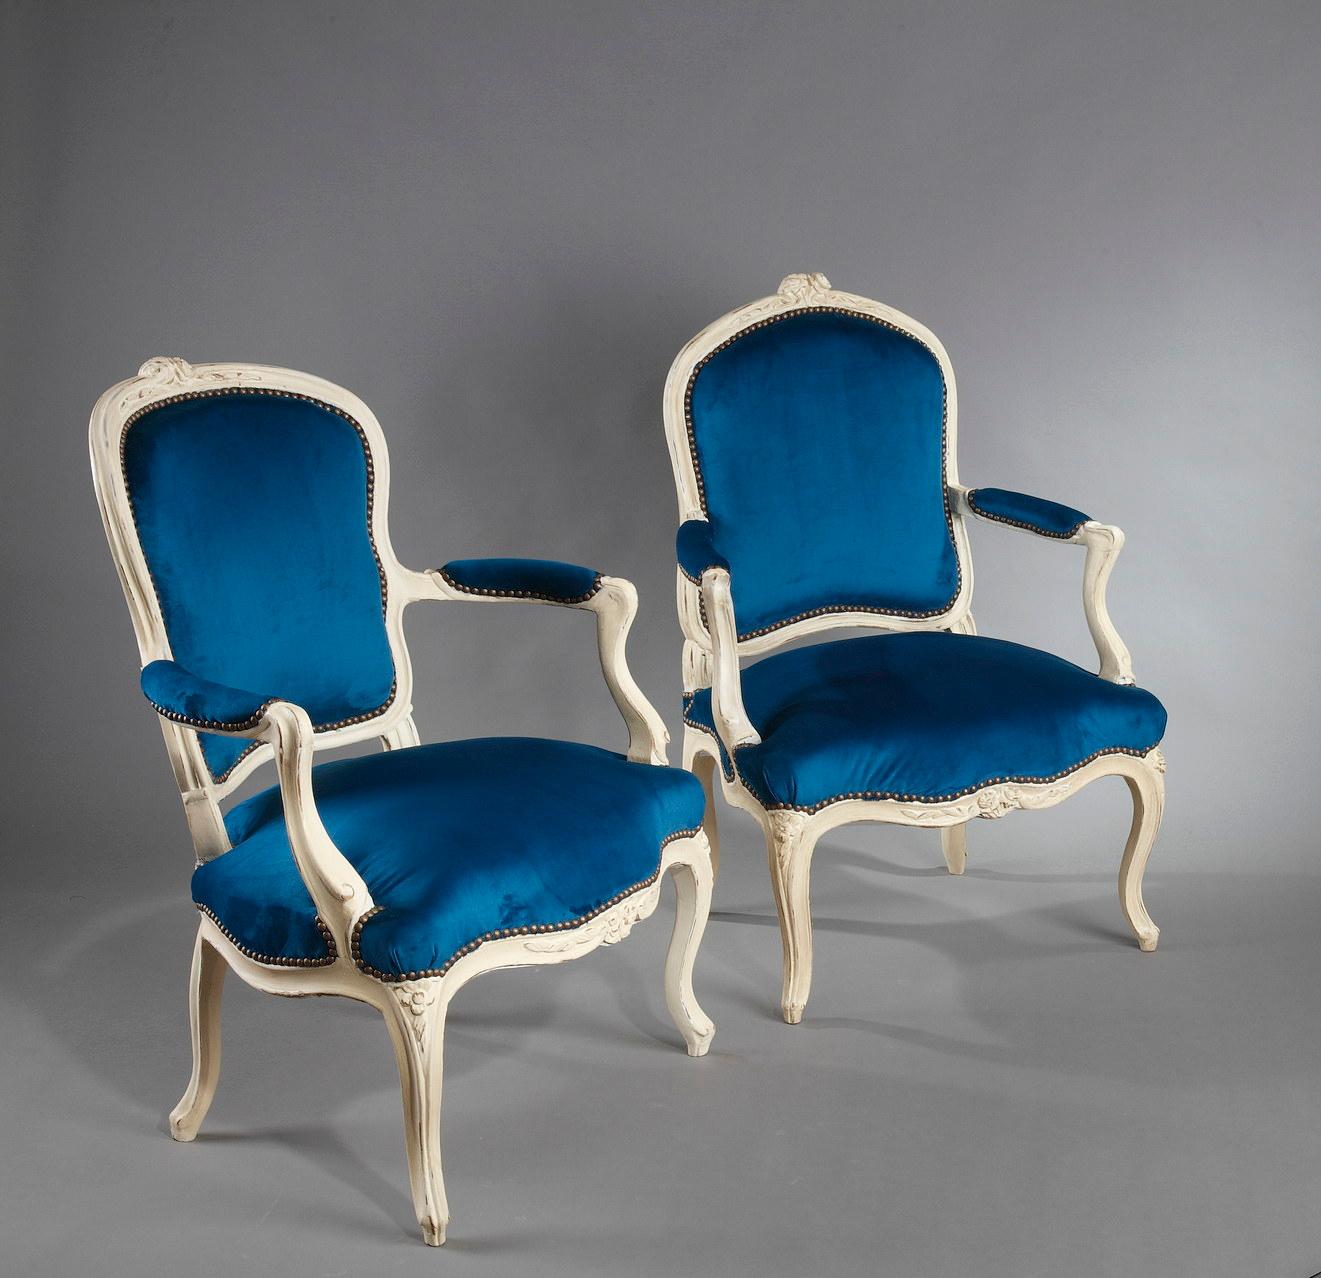 This is a set of four Louis XV period armchairs in walnut wood. They are molded and carved with flowers. Each chair rests on four arched legs and has two sinuous armrests. Three of the seats have a cabriolet shaped back and one has a flat back. The